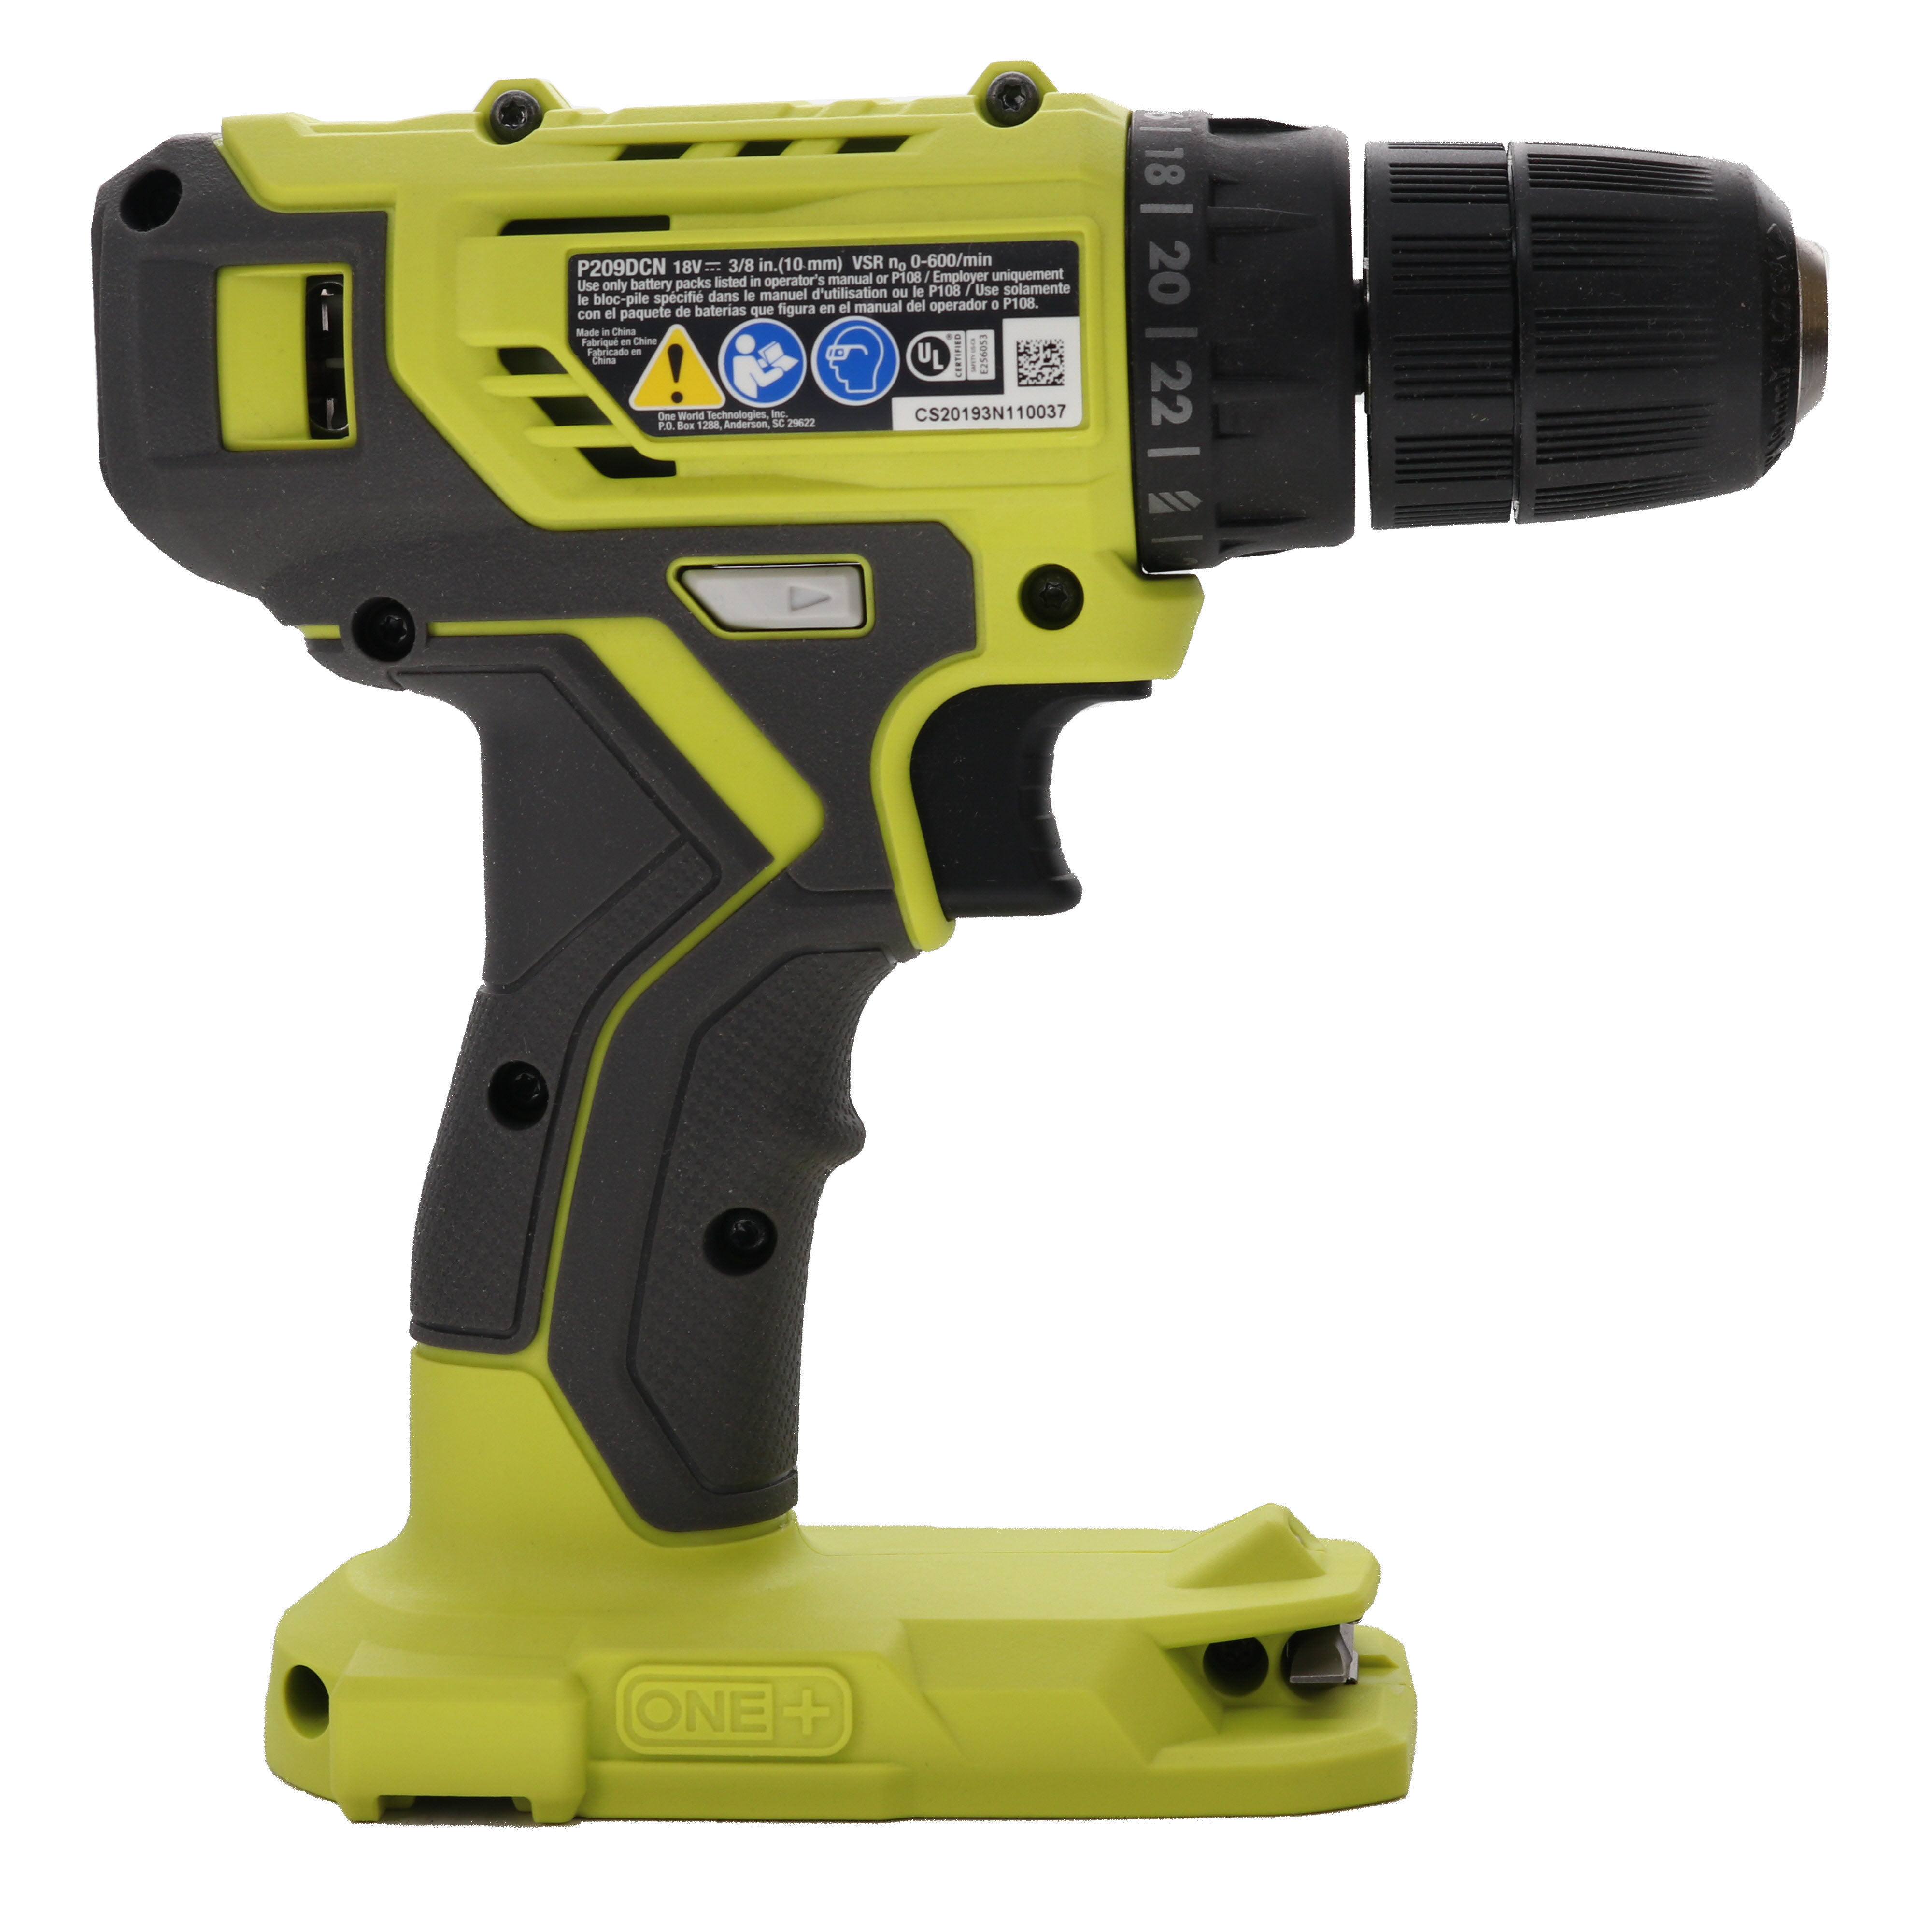 ZX404 Cordless Drill Driver Tool Only Ryobi P209DCN 18v One 